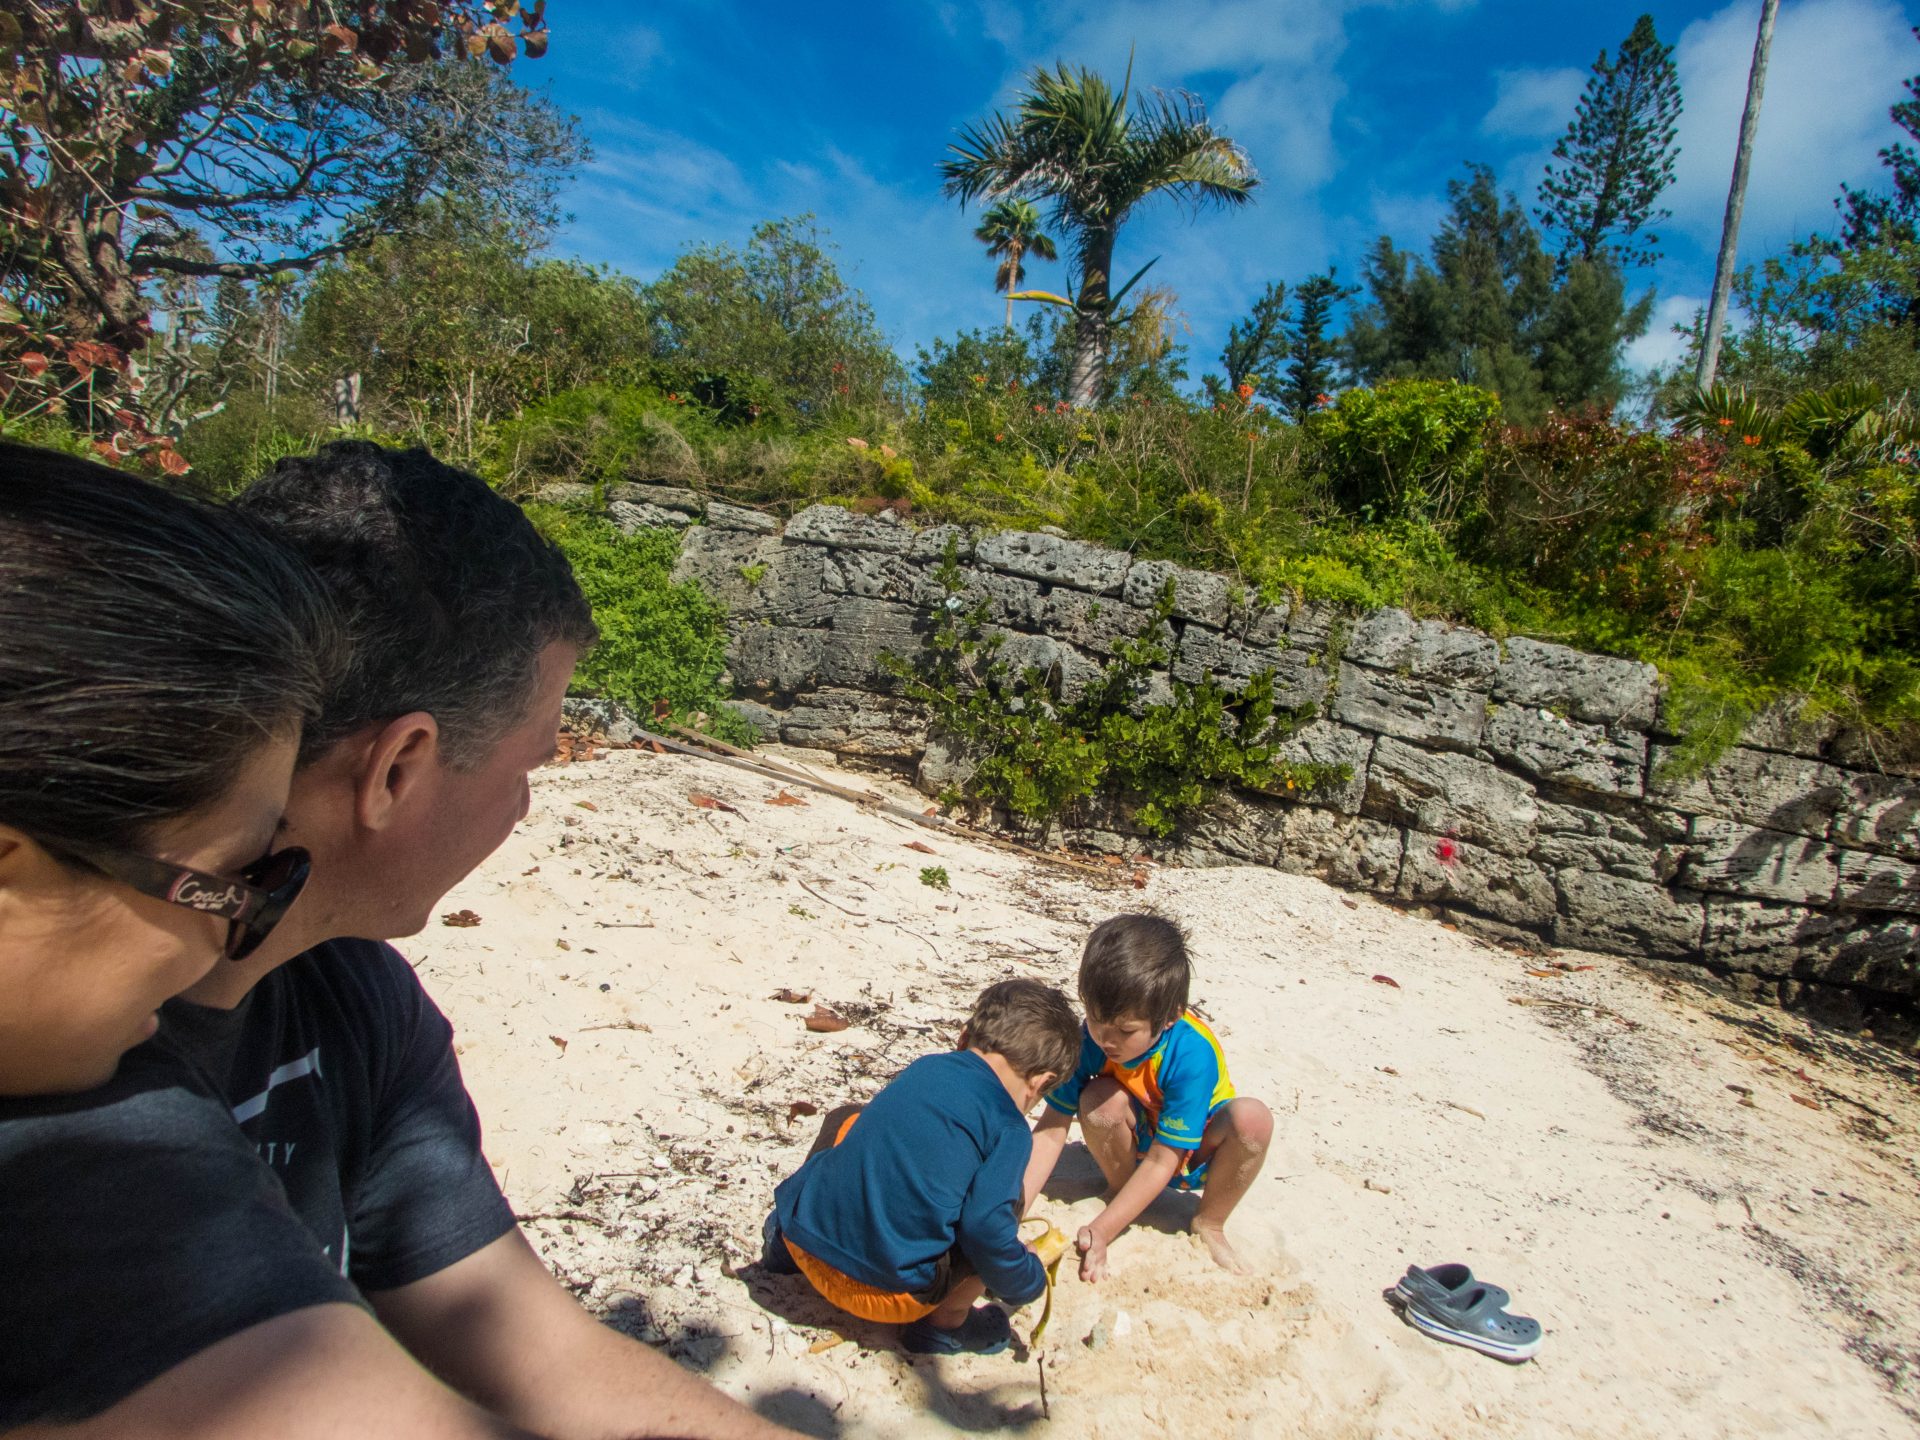 Two parents watch their children playing in the sand on the beach - Boating in Bermuda